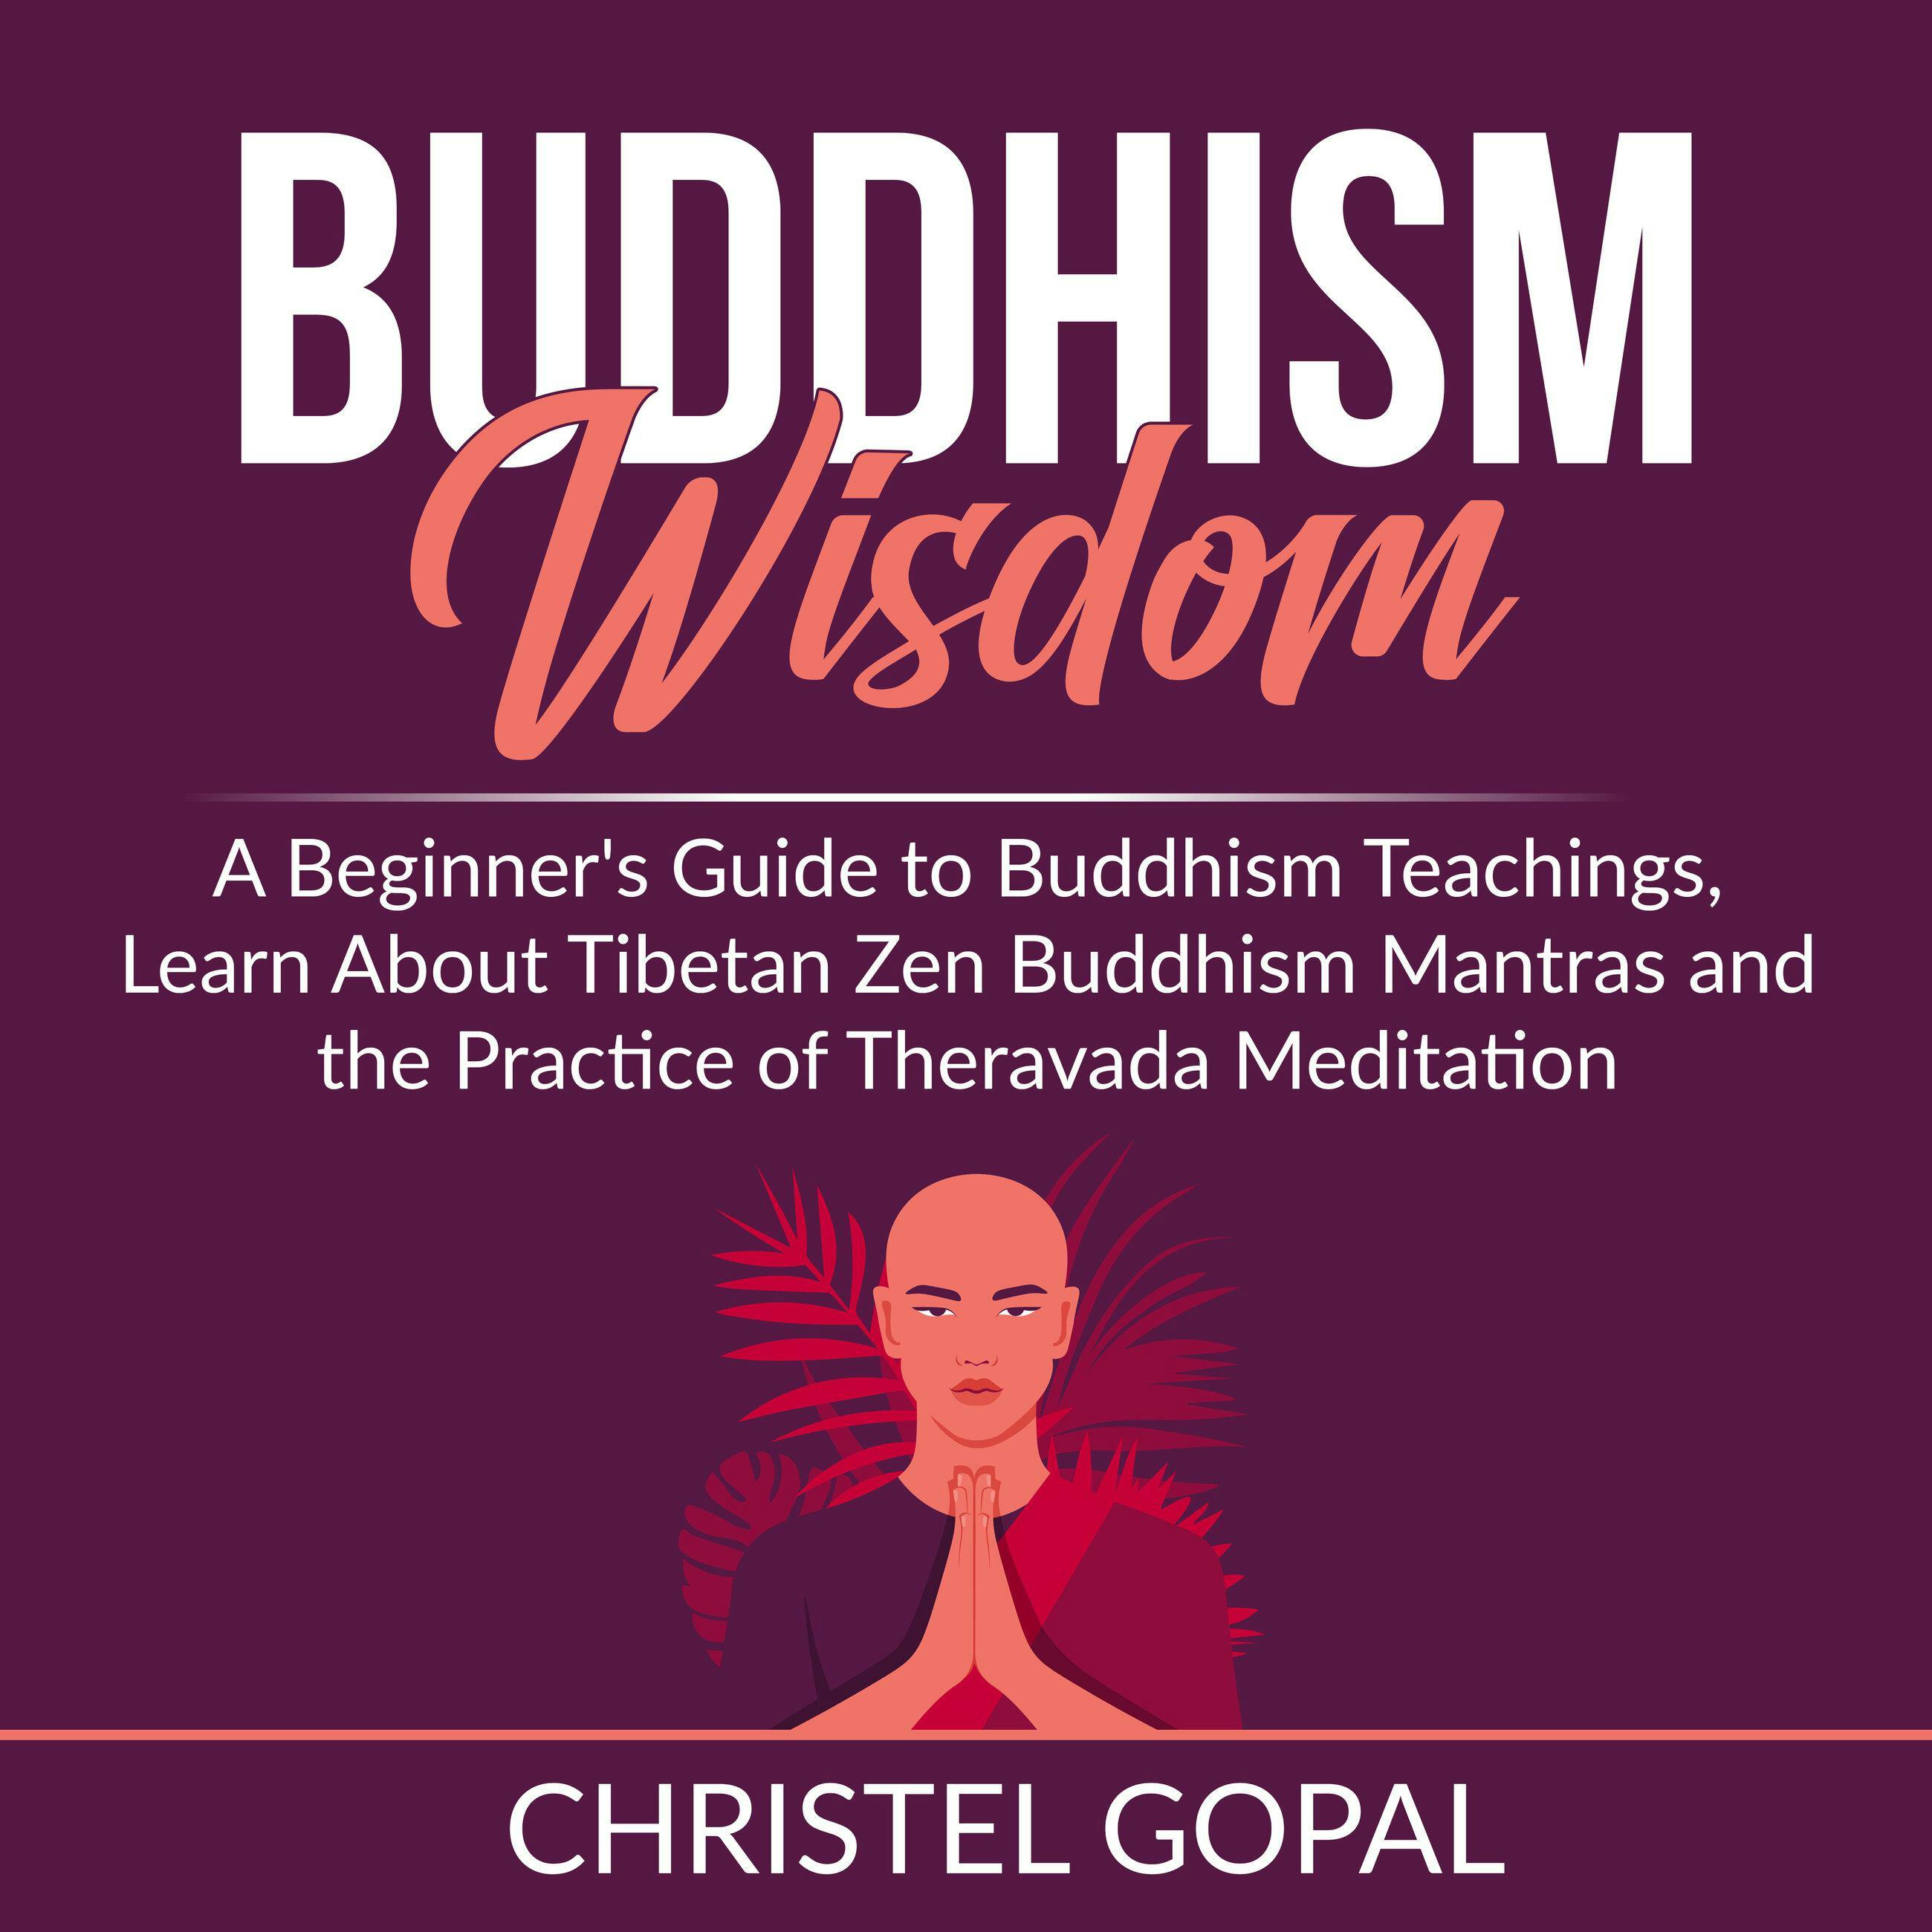 Buddhism Wisdom: A Beginner's Guide to Buddhism Teachings, Learn About Tibetan Zen Buddhism Mantras and the Practice of Theravada Meditation - Christel Gopal